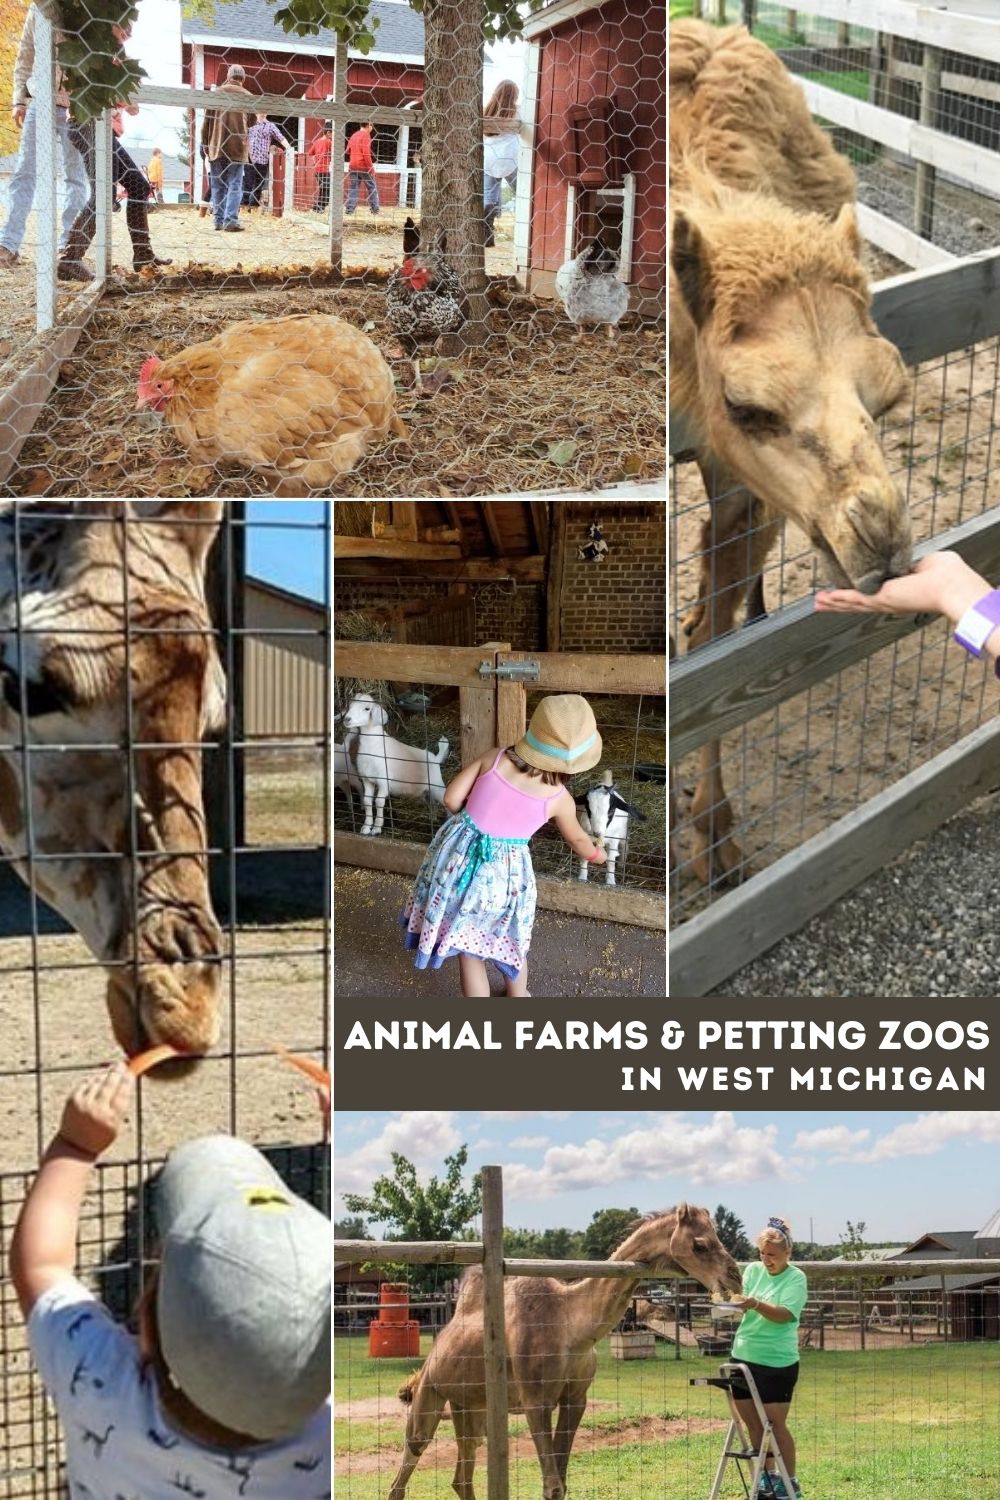 Animal Farms & Petting Zoos: 25+ Farms for Kids to Visit in West Michigan -  